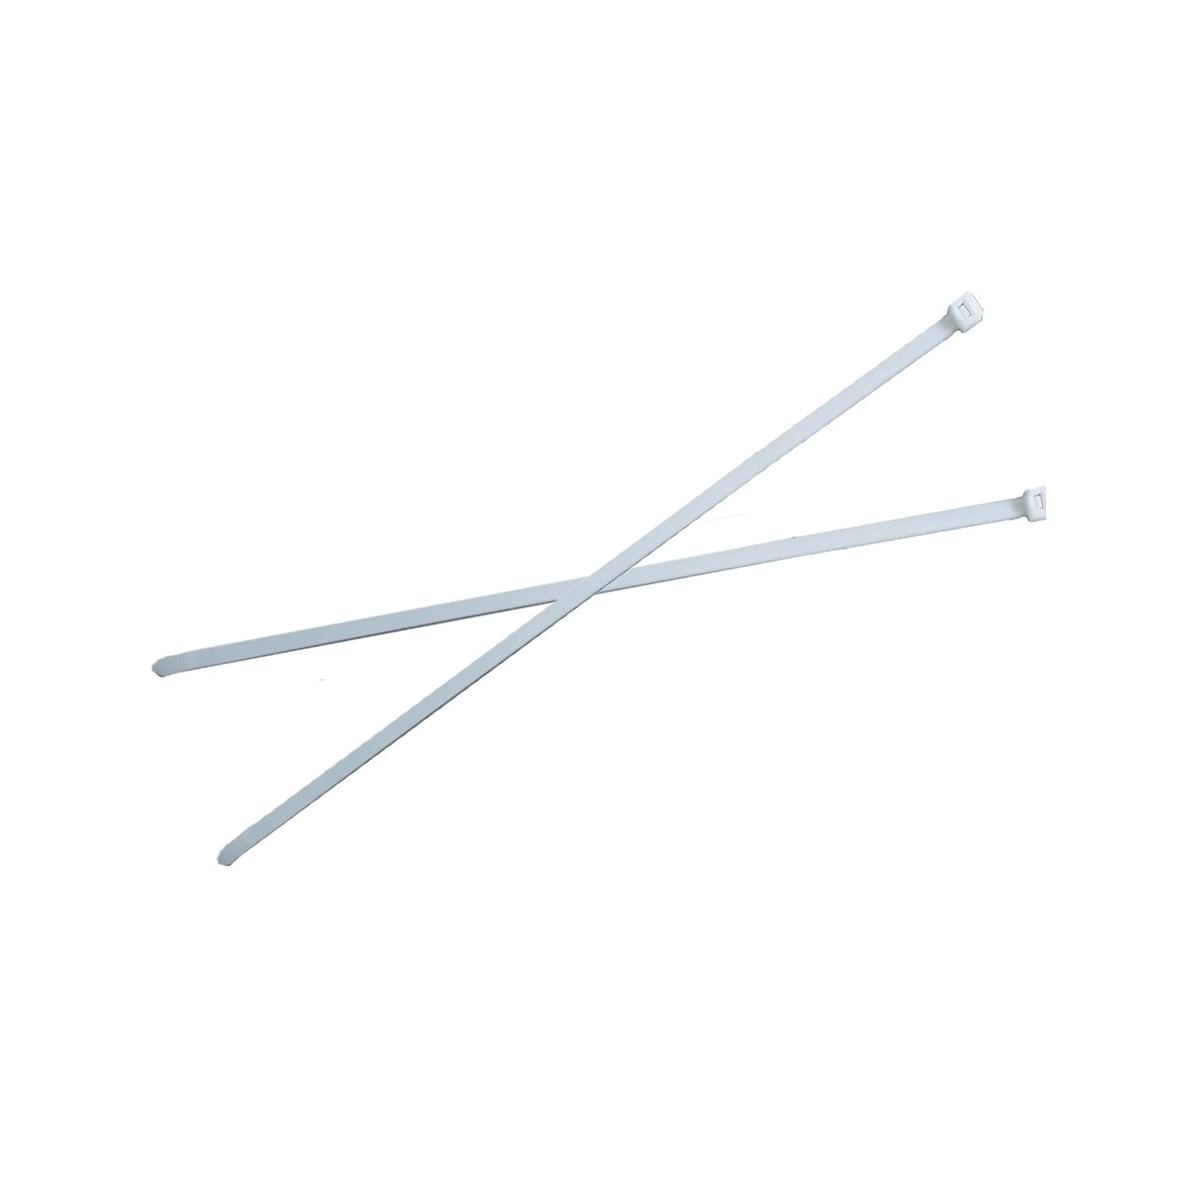 Hubbell CT18075M Natural Nylon 6/6 Cable Tie, 0.75" Max. Bundle Dia, 18 Lbs, 4" Long, 0.10" Wide.  ; Standard Cable Tie ; Features: Cable Ties for General Use Available in Black or Natural, One piece injection molded, Installation Tool: TWT1, MK7 Tool